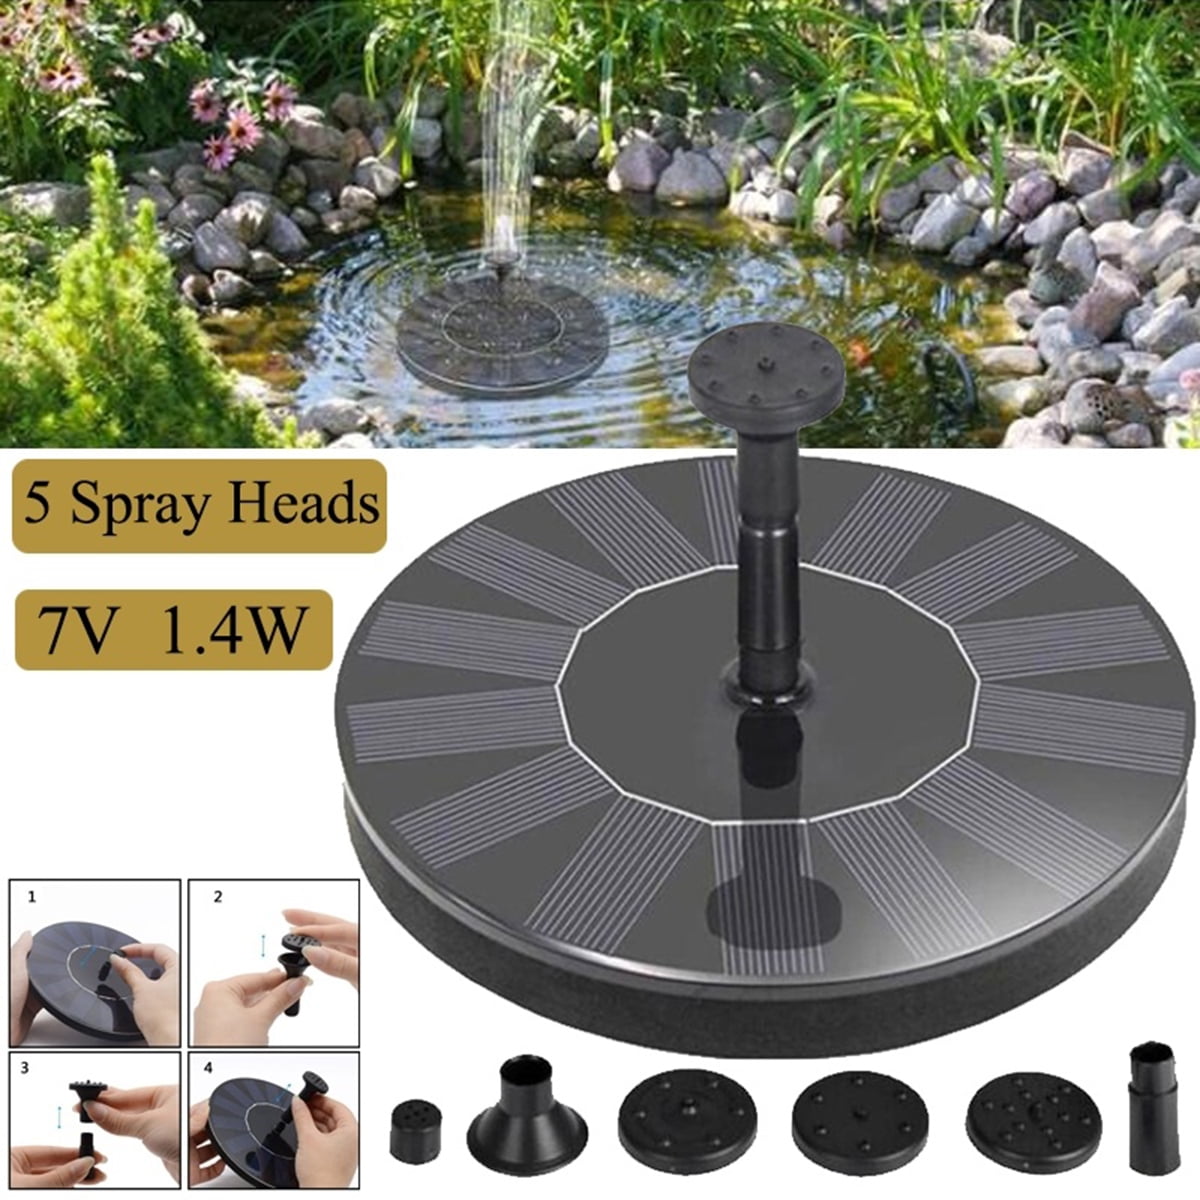 7V 1.4W Solar Panel Floating Fountain Garden Pool Pond Water Pump Kit Outdoor BE 